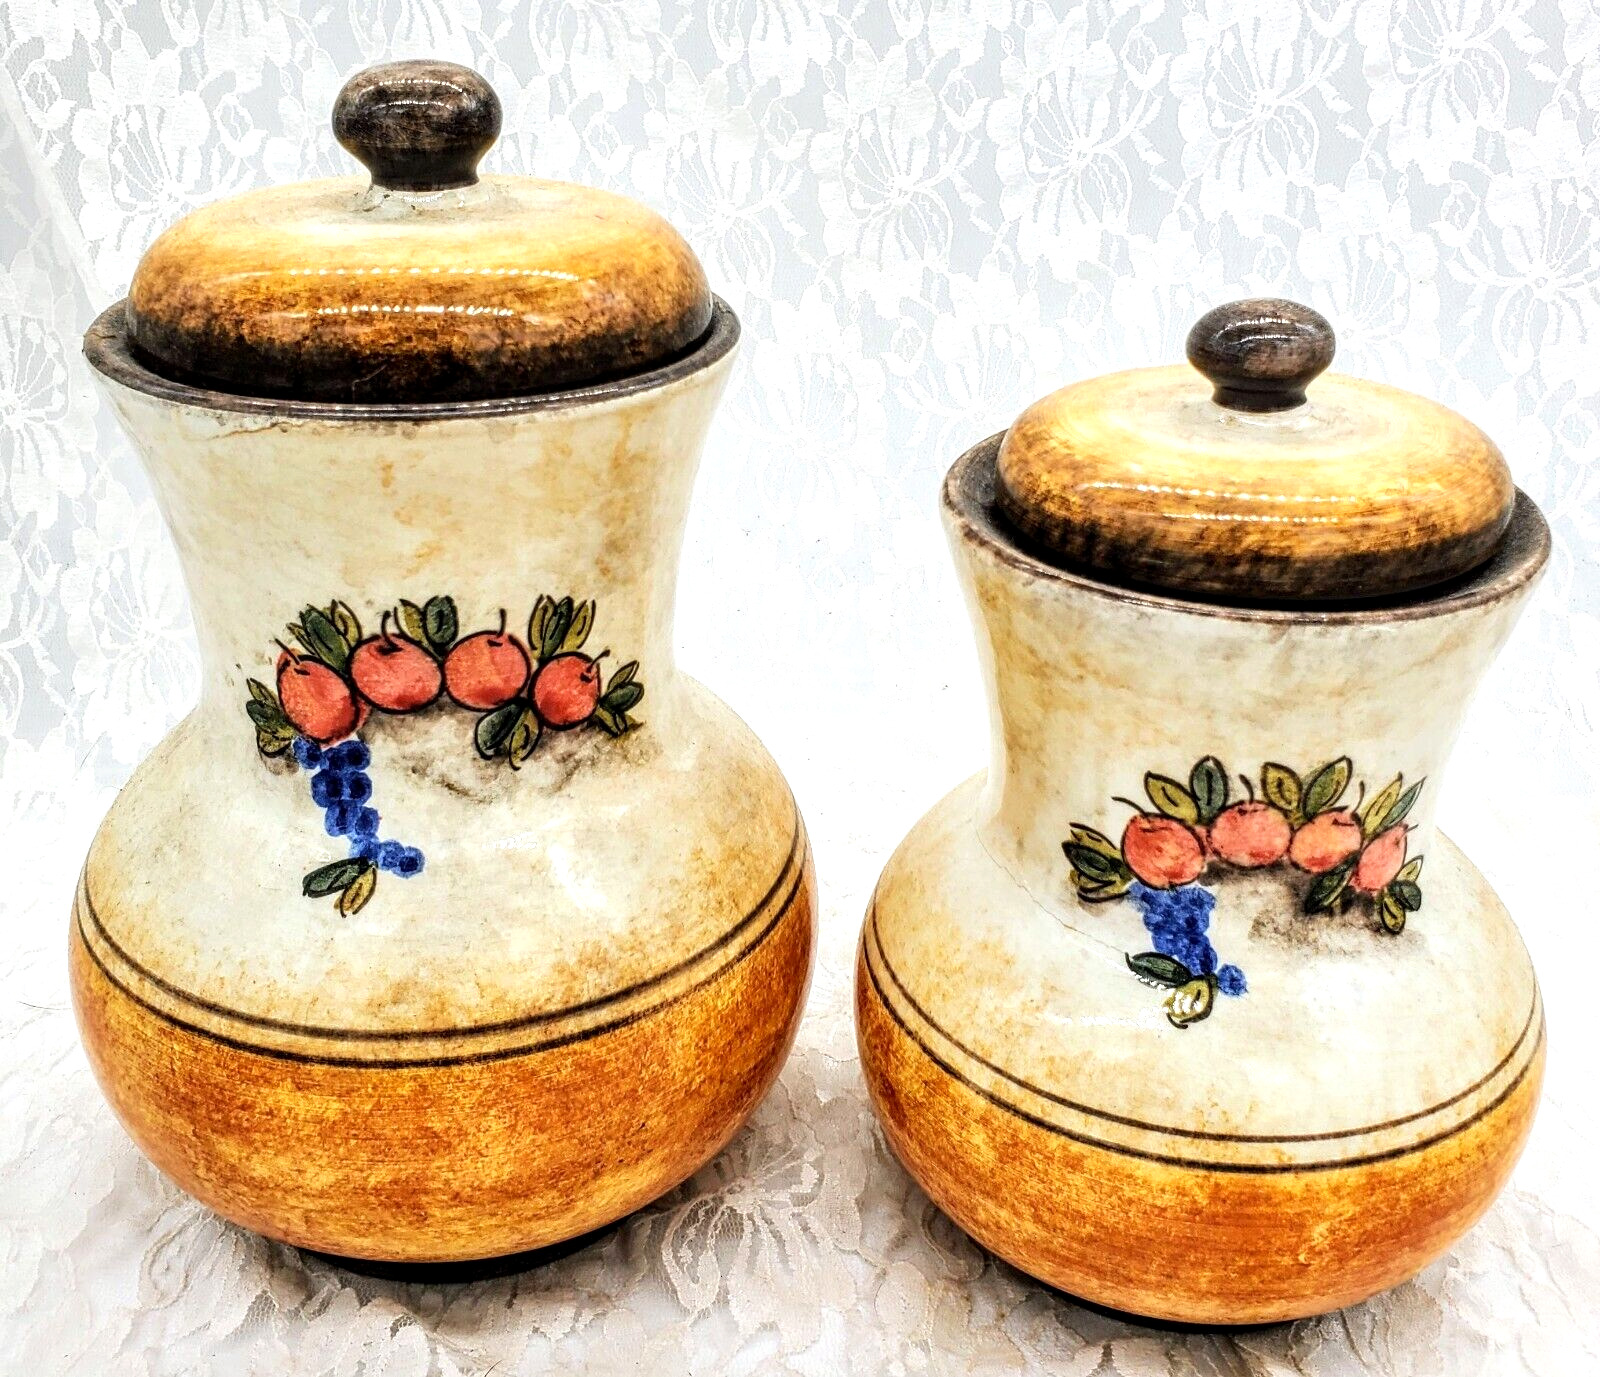 LOT (2) VINTAGE Horchow Pottery Canister Lidded Jars Italian Kitchen Decor ITALY